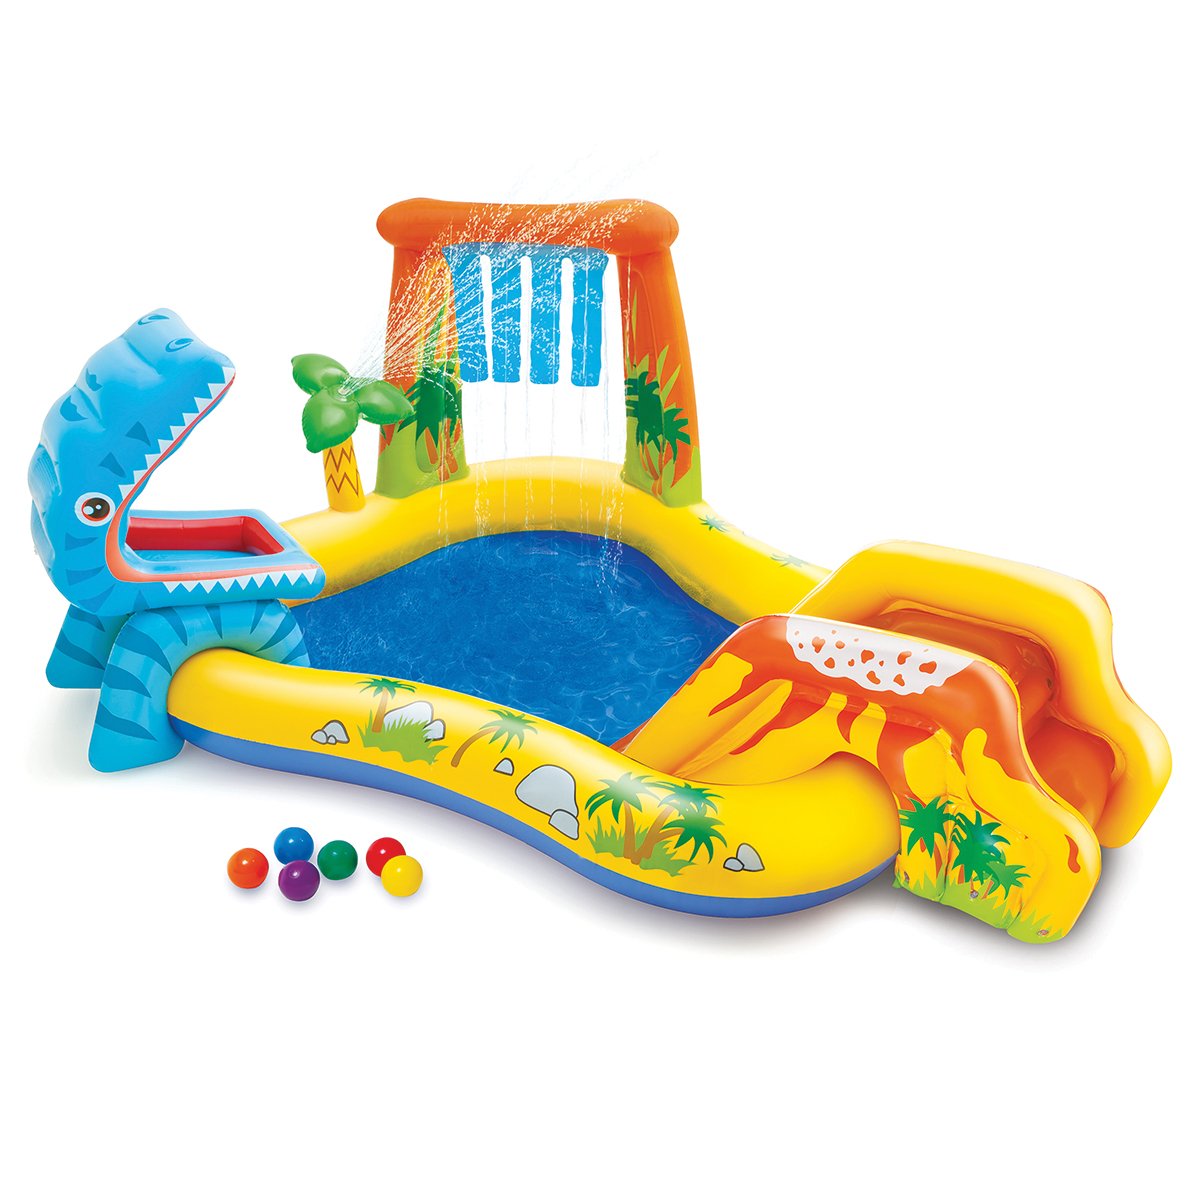 Intex 57444 Dinosaur Play Centre Kids Inflatable Pool with Water Slide 2